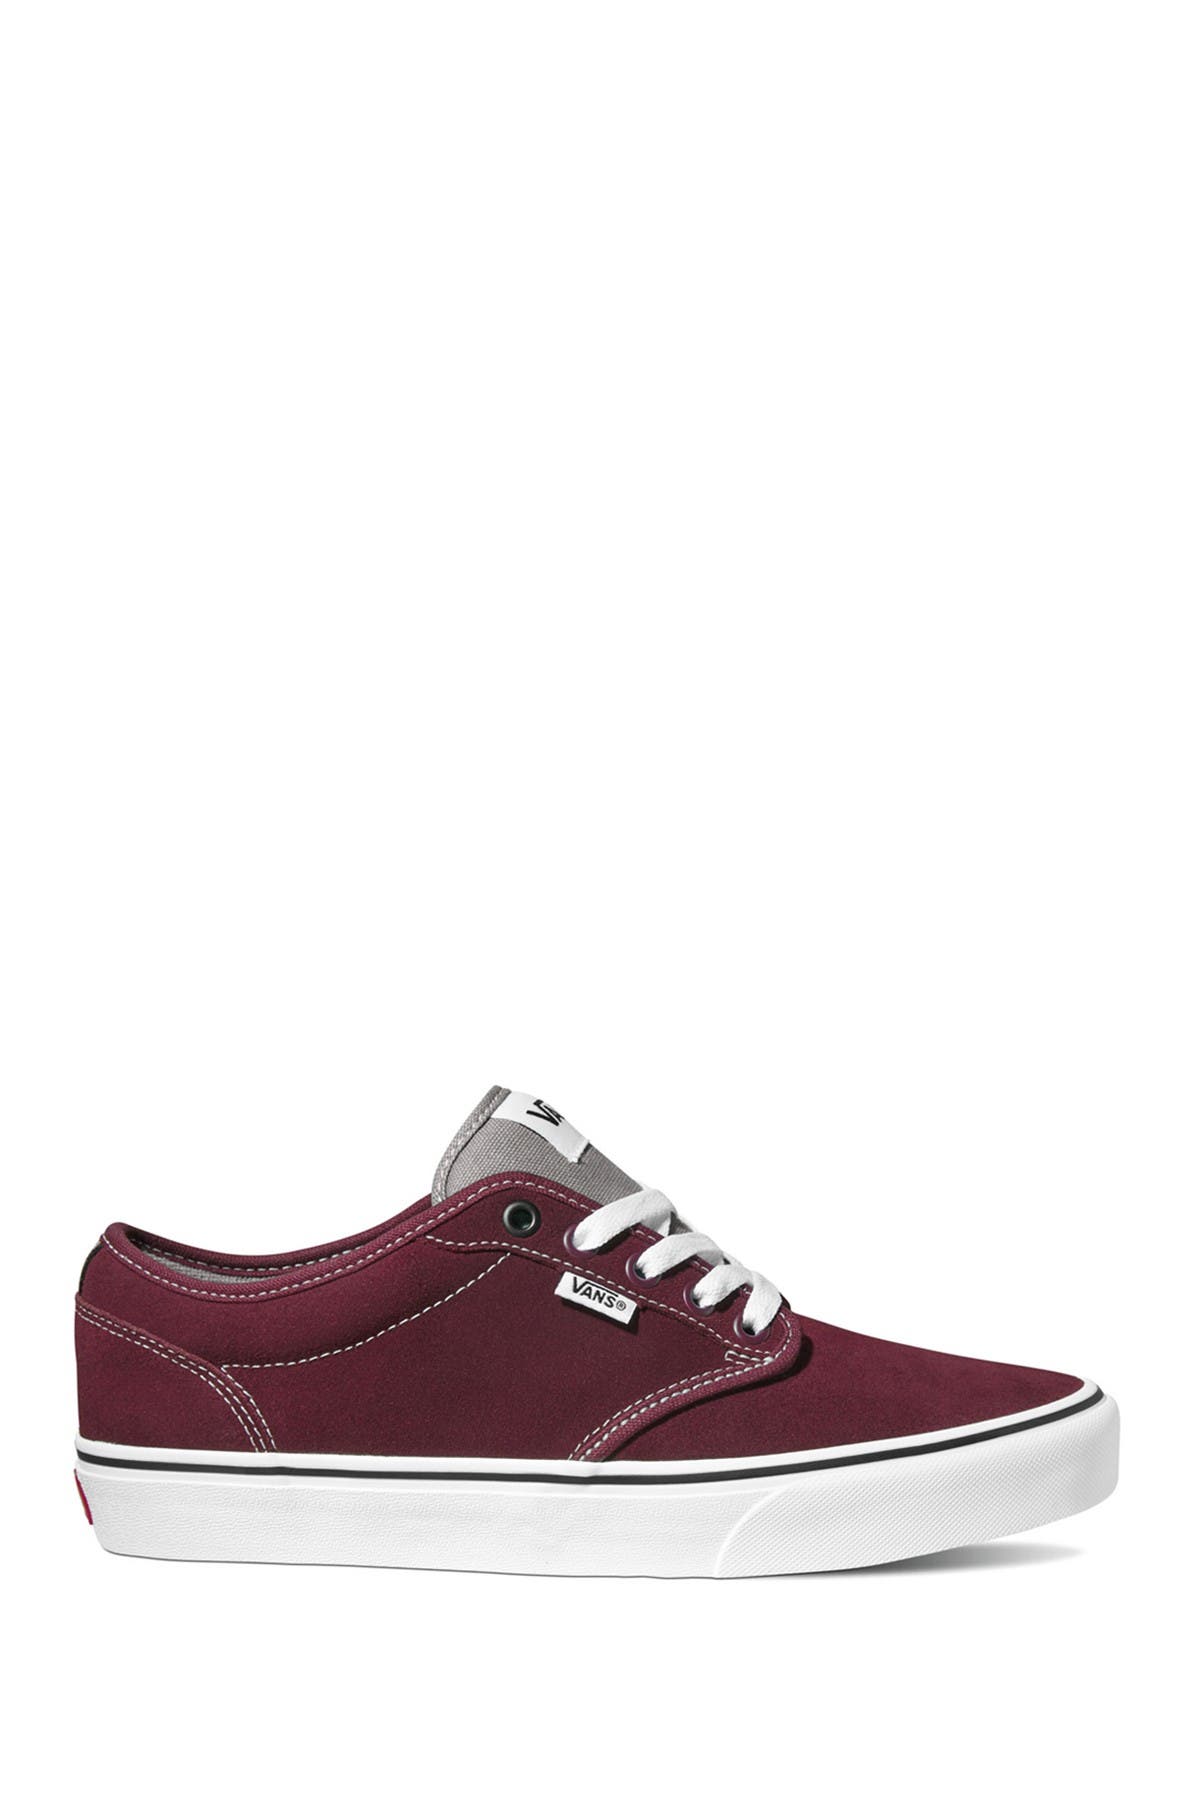 atwood low